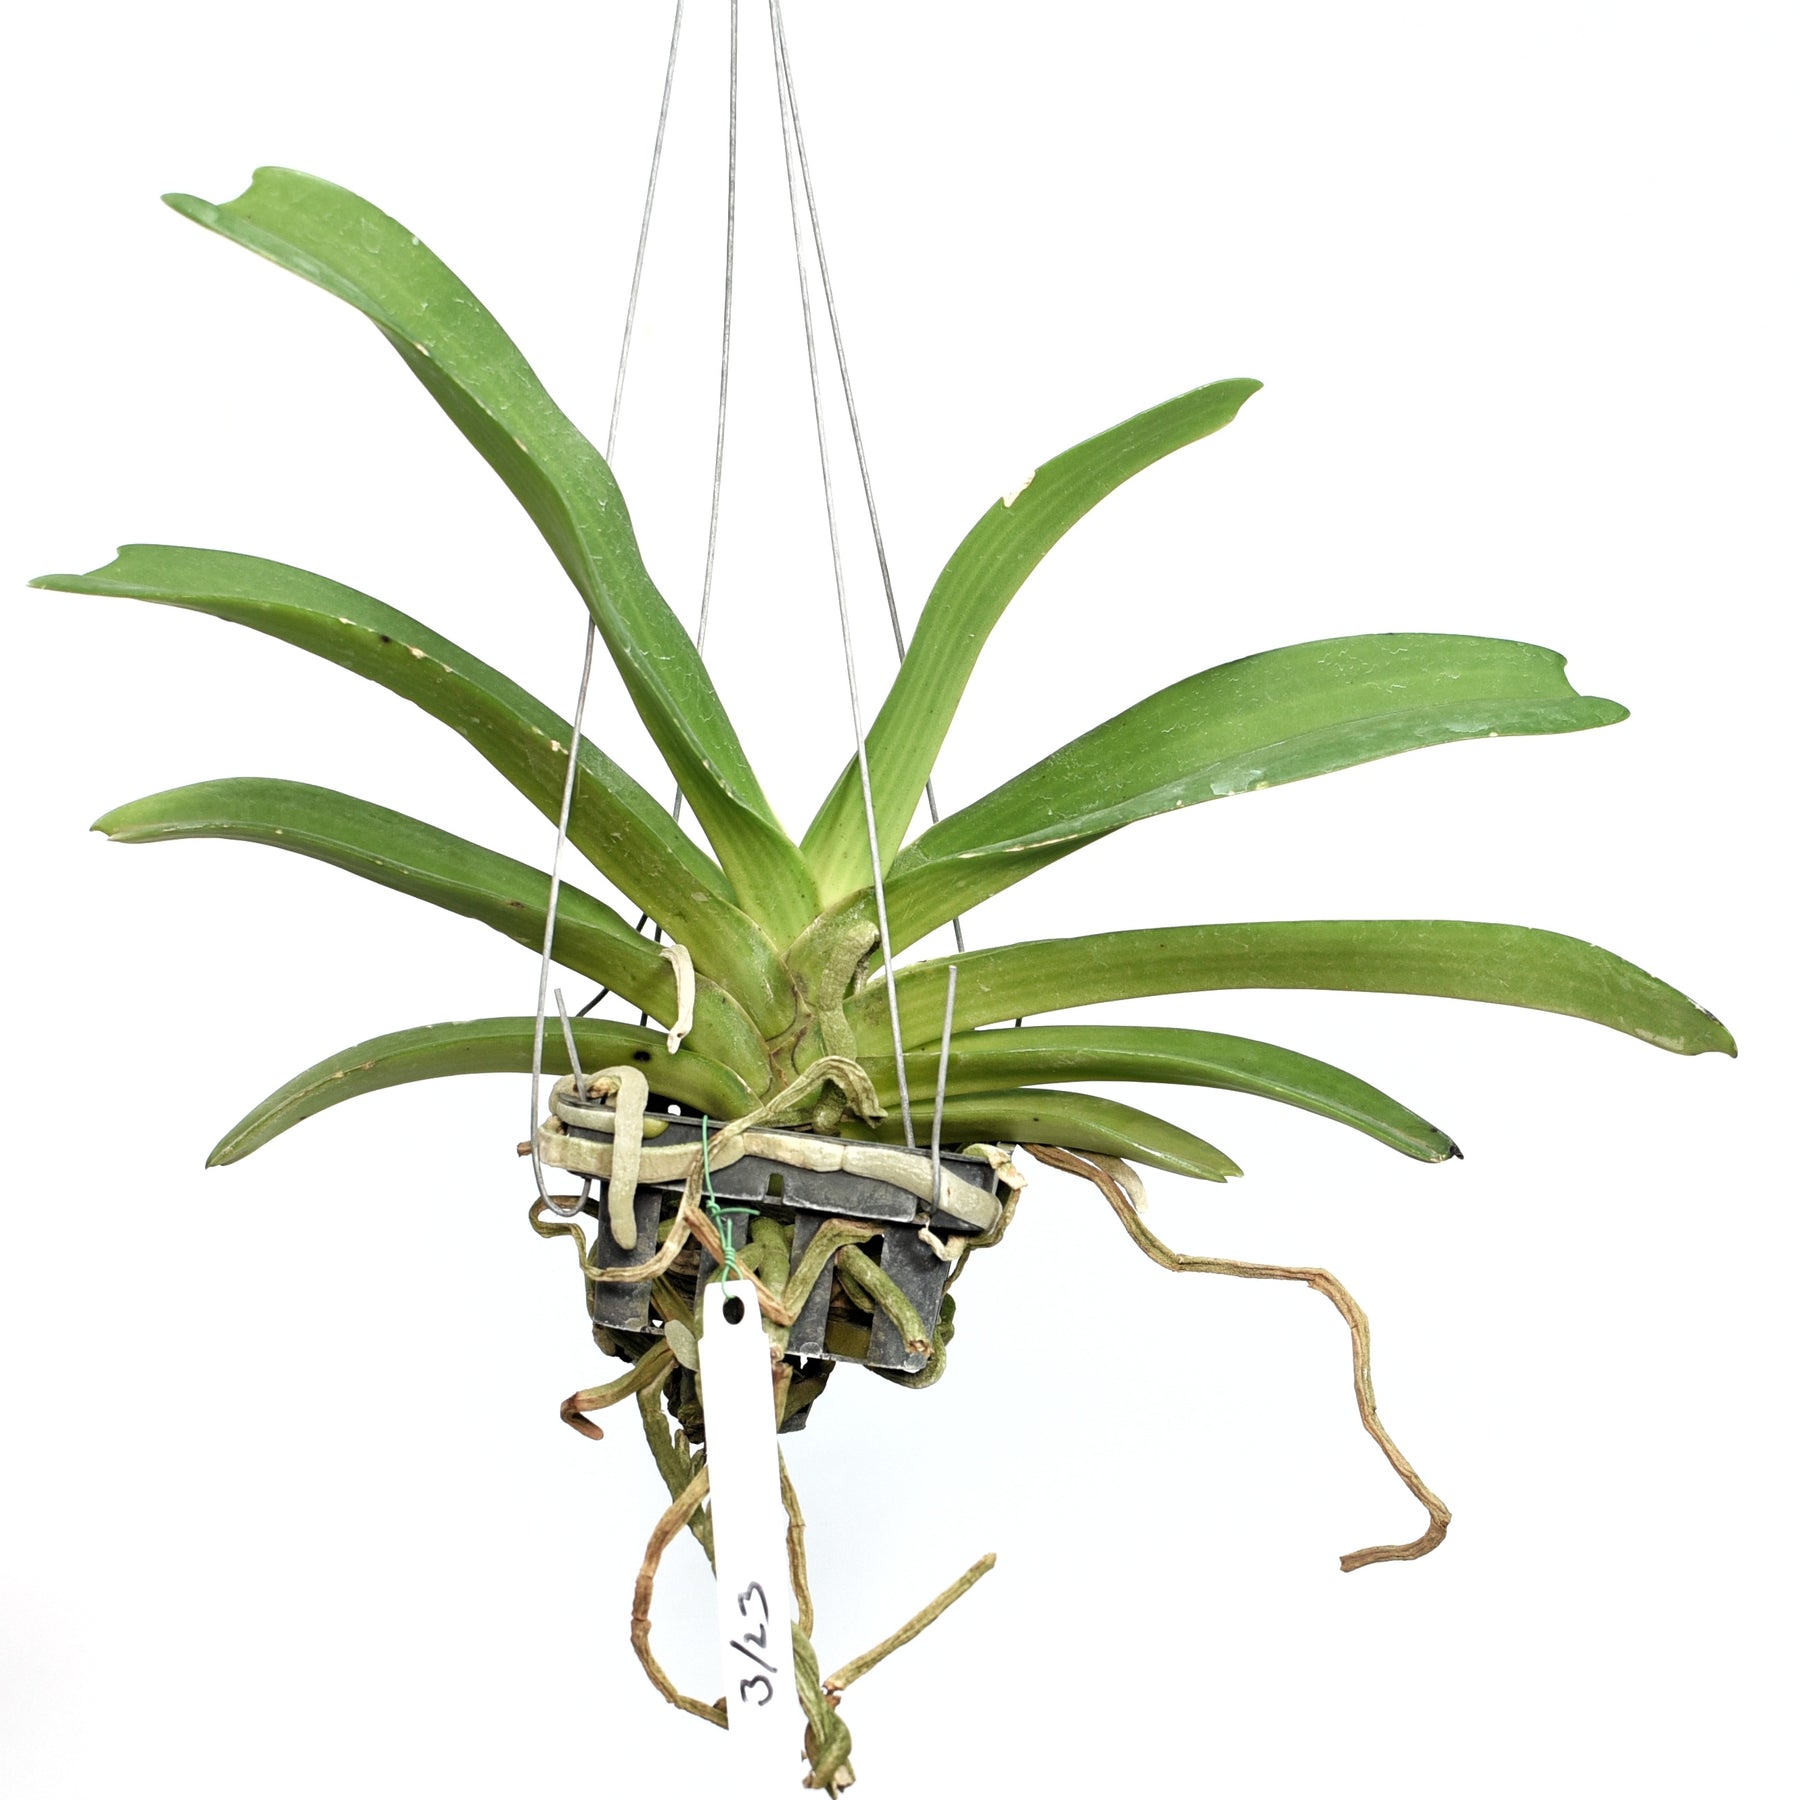 Exquisite Rhynchostylis Gigantea 'Ply' orchid - Add a touch of rarity to your indoor garden